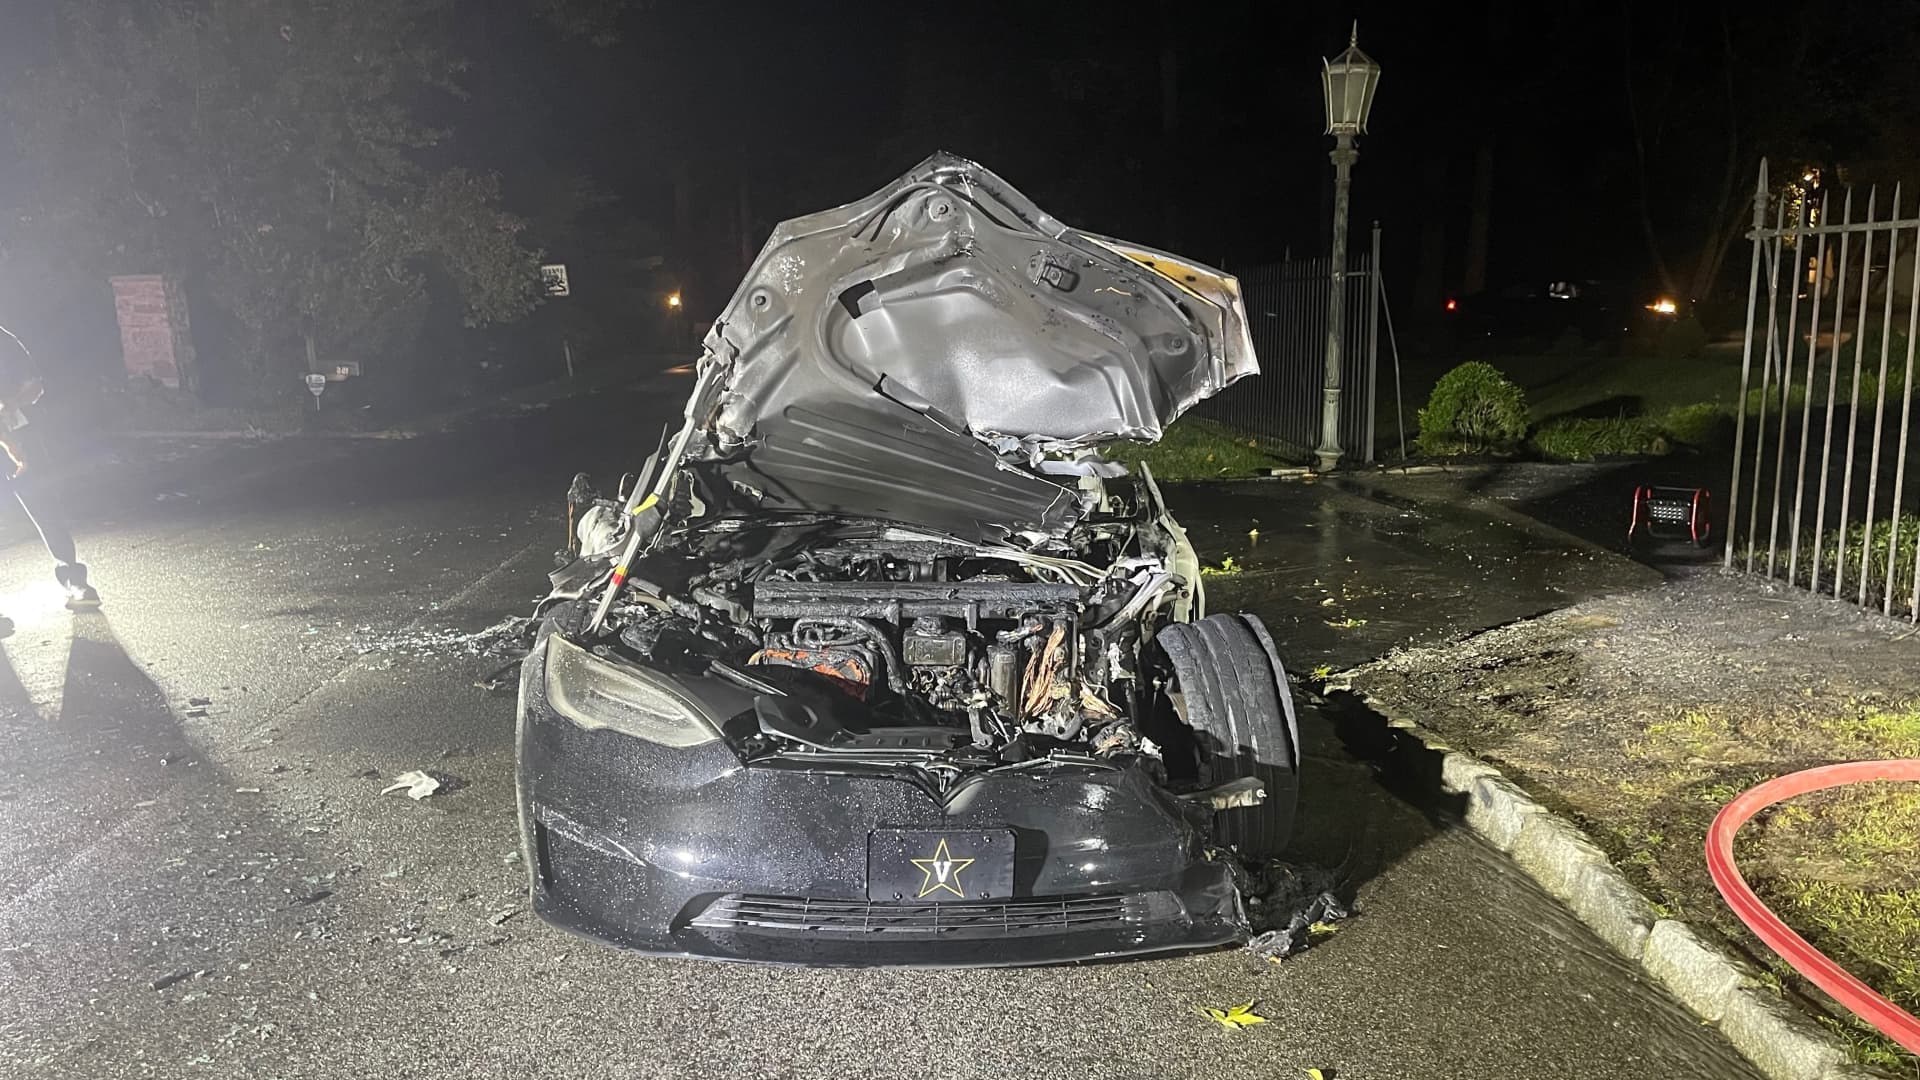 This Tesla Model S Plaid caught fire while the driver was at the wheel, according to a local fire chief and attorneys representing the driver, on June 29, 2021, in Haverford, Pennsylvania.